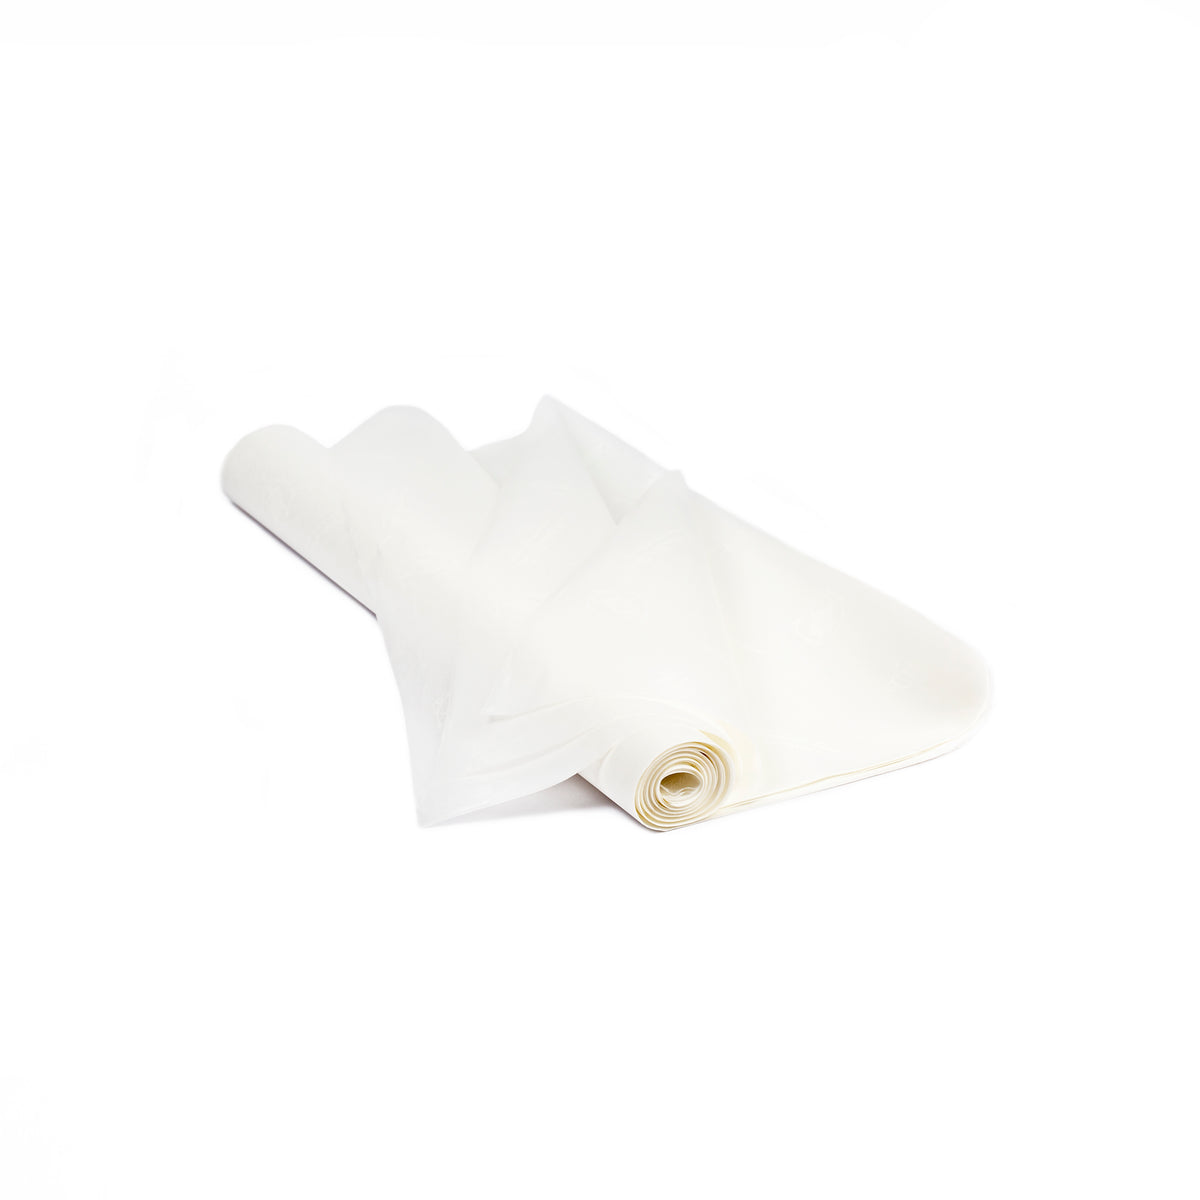 Folded acid-free tissue paper roll on pure white background